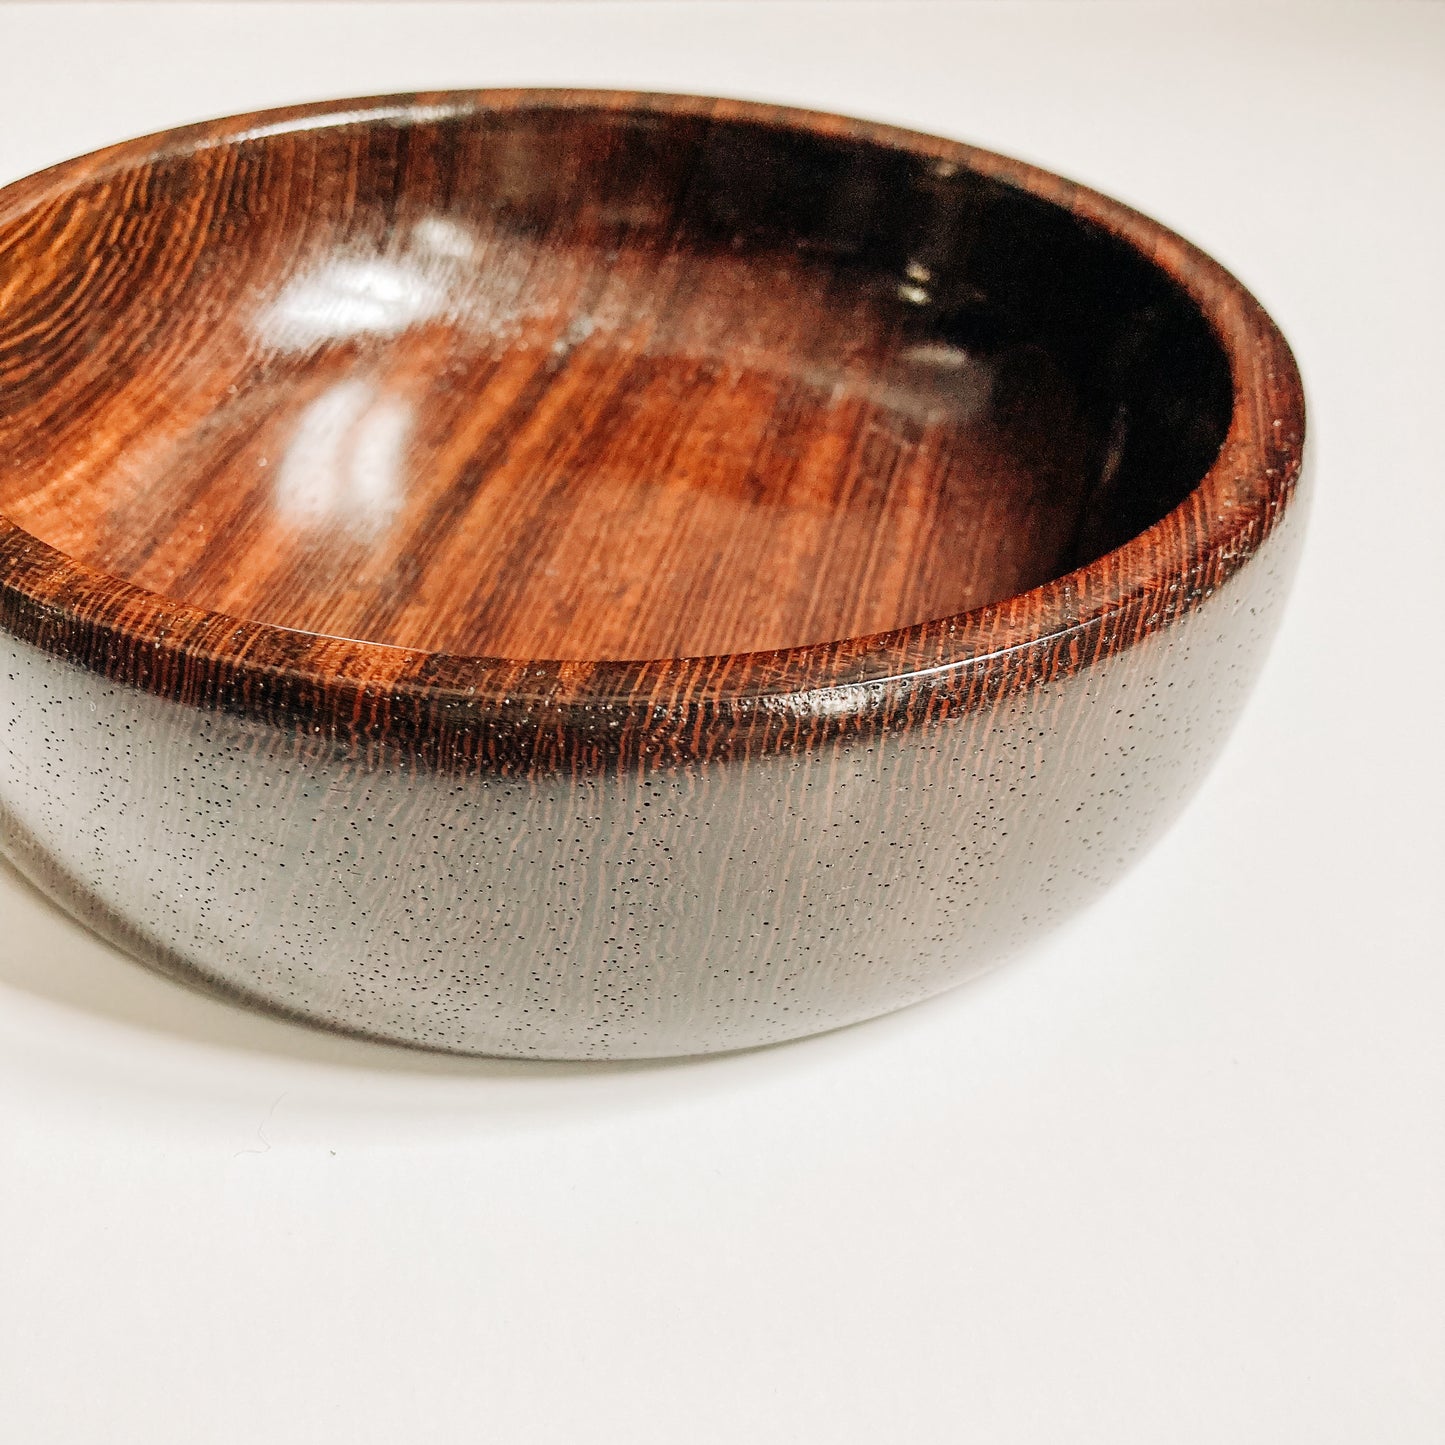 Wenge Wooden Carved Bowl - 6 inches by John Parsons Jr. Woodworking